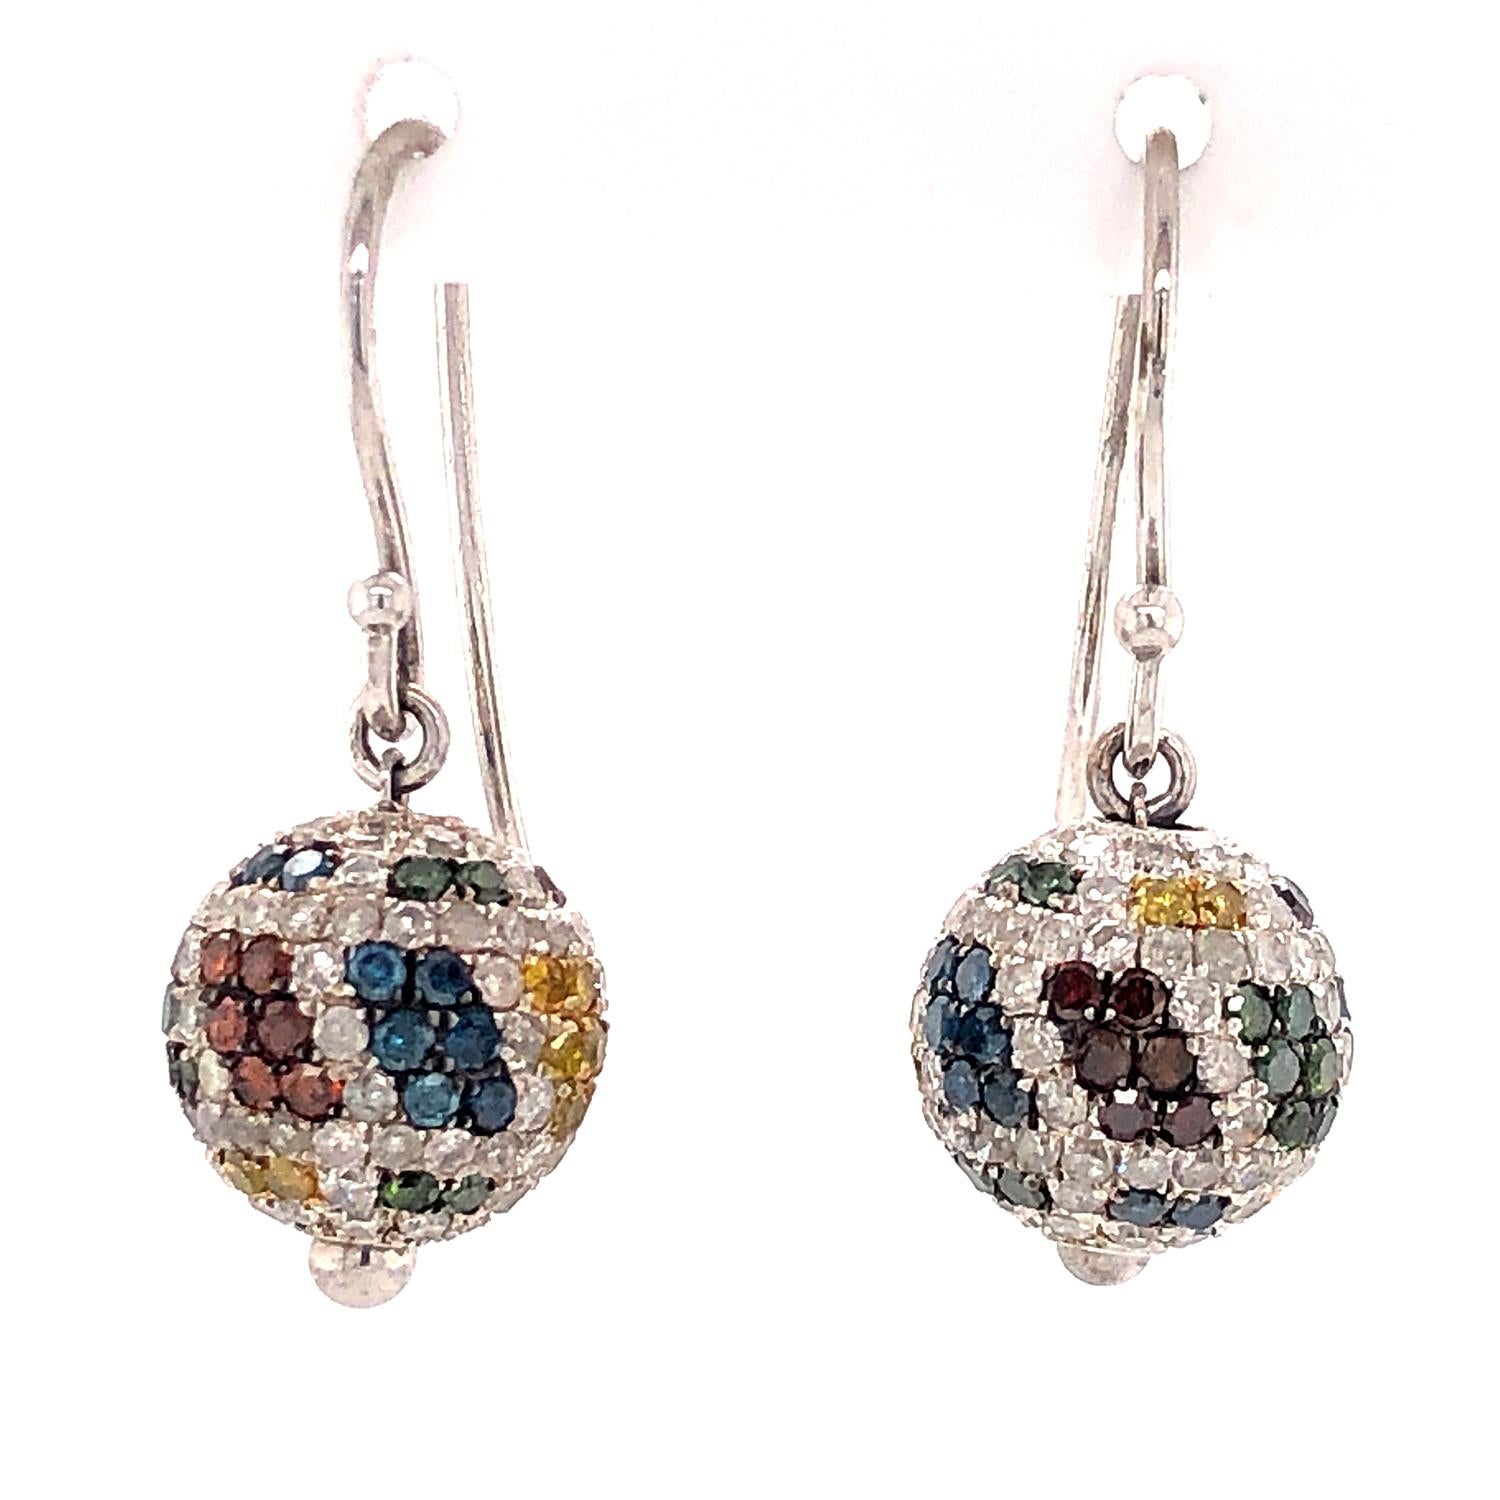 Mixed Cut Ranibow Color Themed Pave Diamonds Ball Earrings Made In 14kt Gold & Silver For Sale